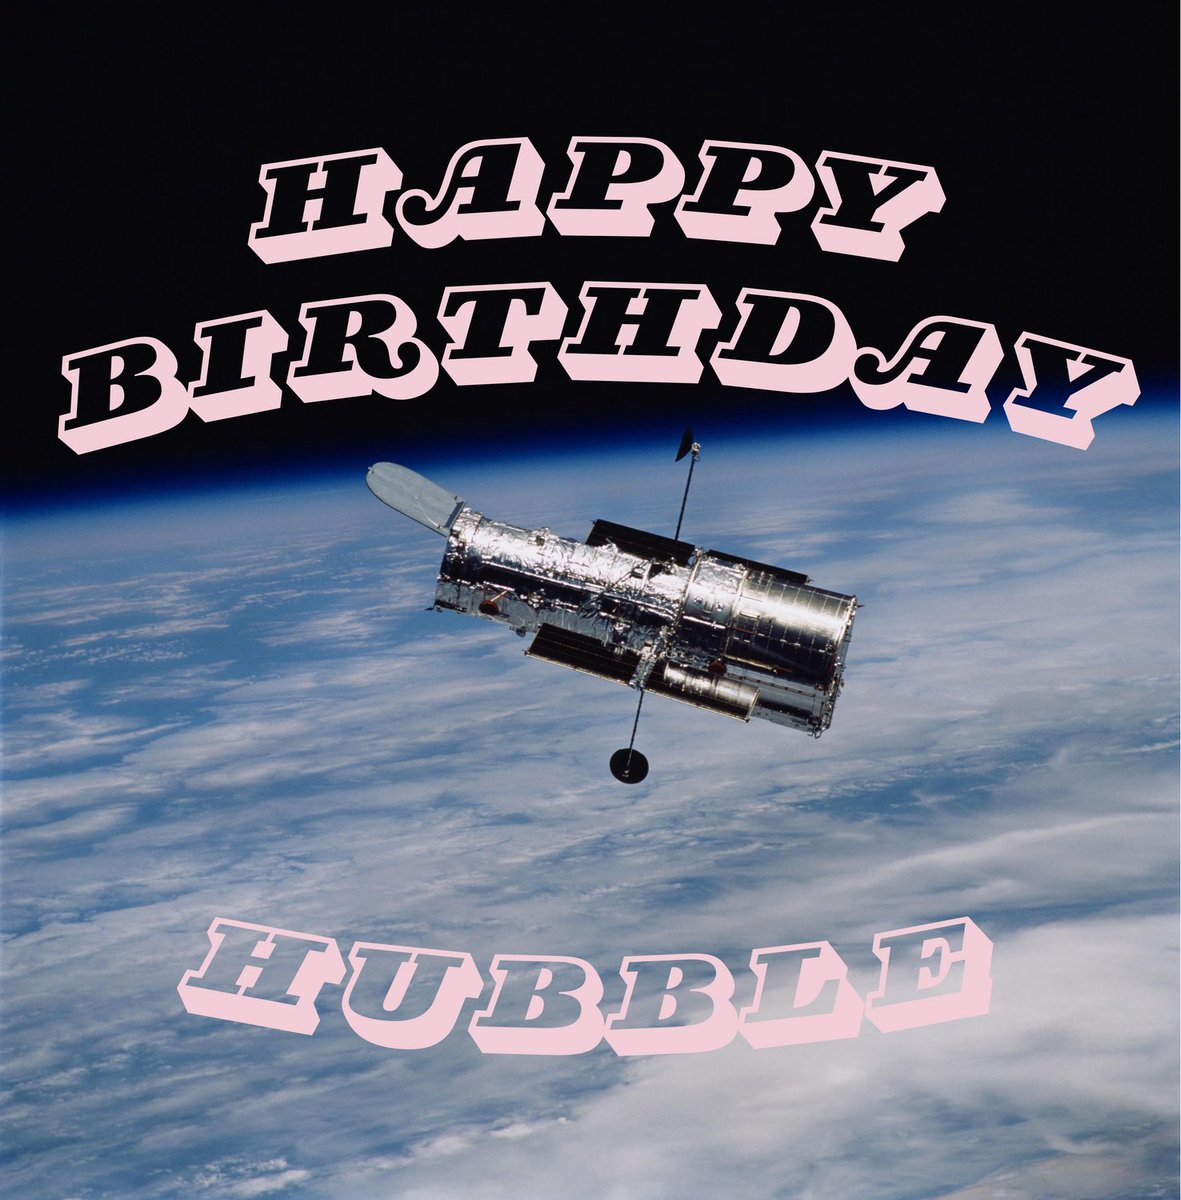 Happy Birthday, Hubble! On 24 April 1990, the Hubble Space Telescope was launched into orbit around Earth. After a rocky beginning, the Hubble has given us a clear window into the Universe more than 30 years. credit: NASA/ESA